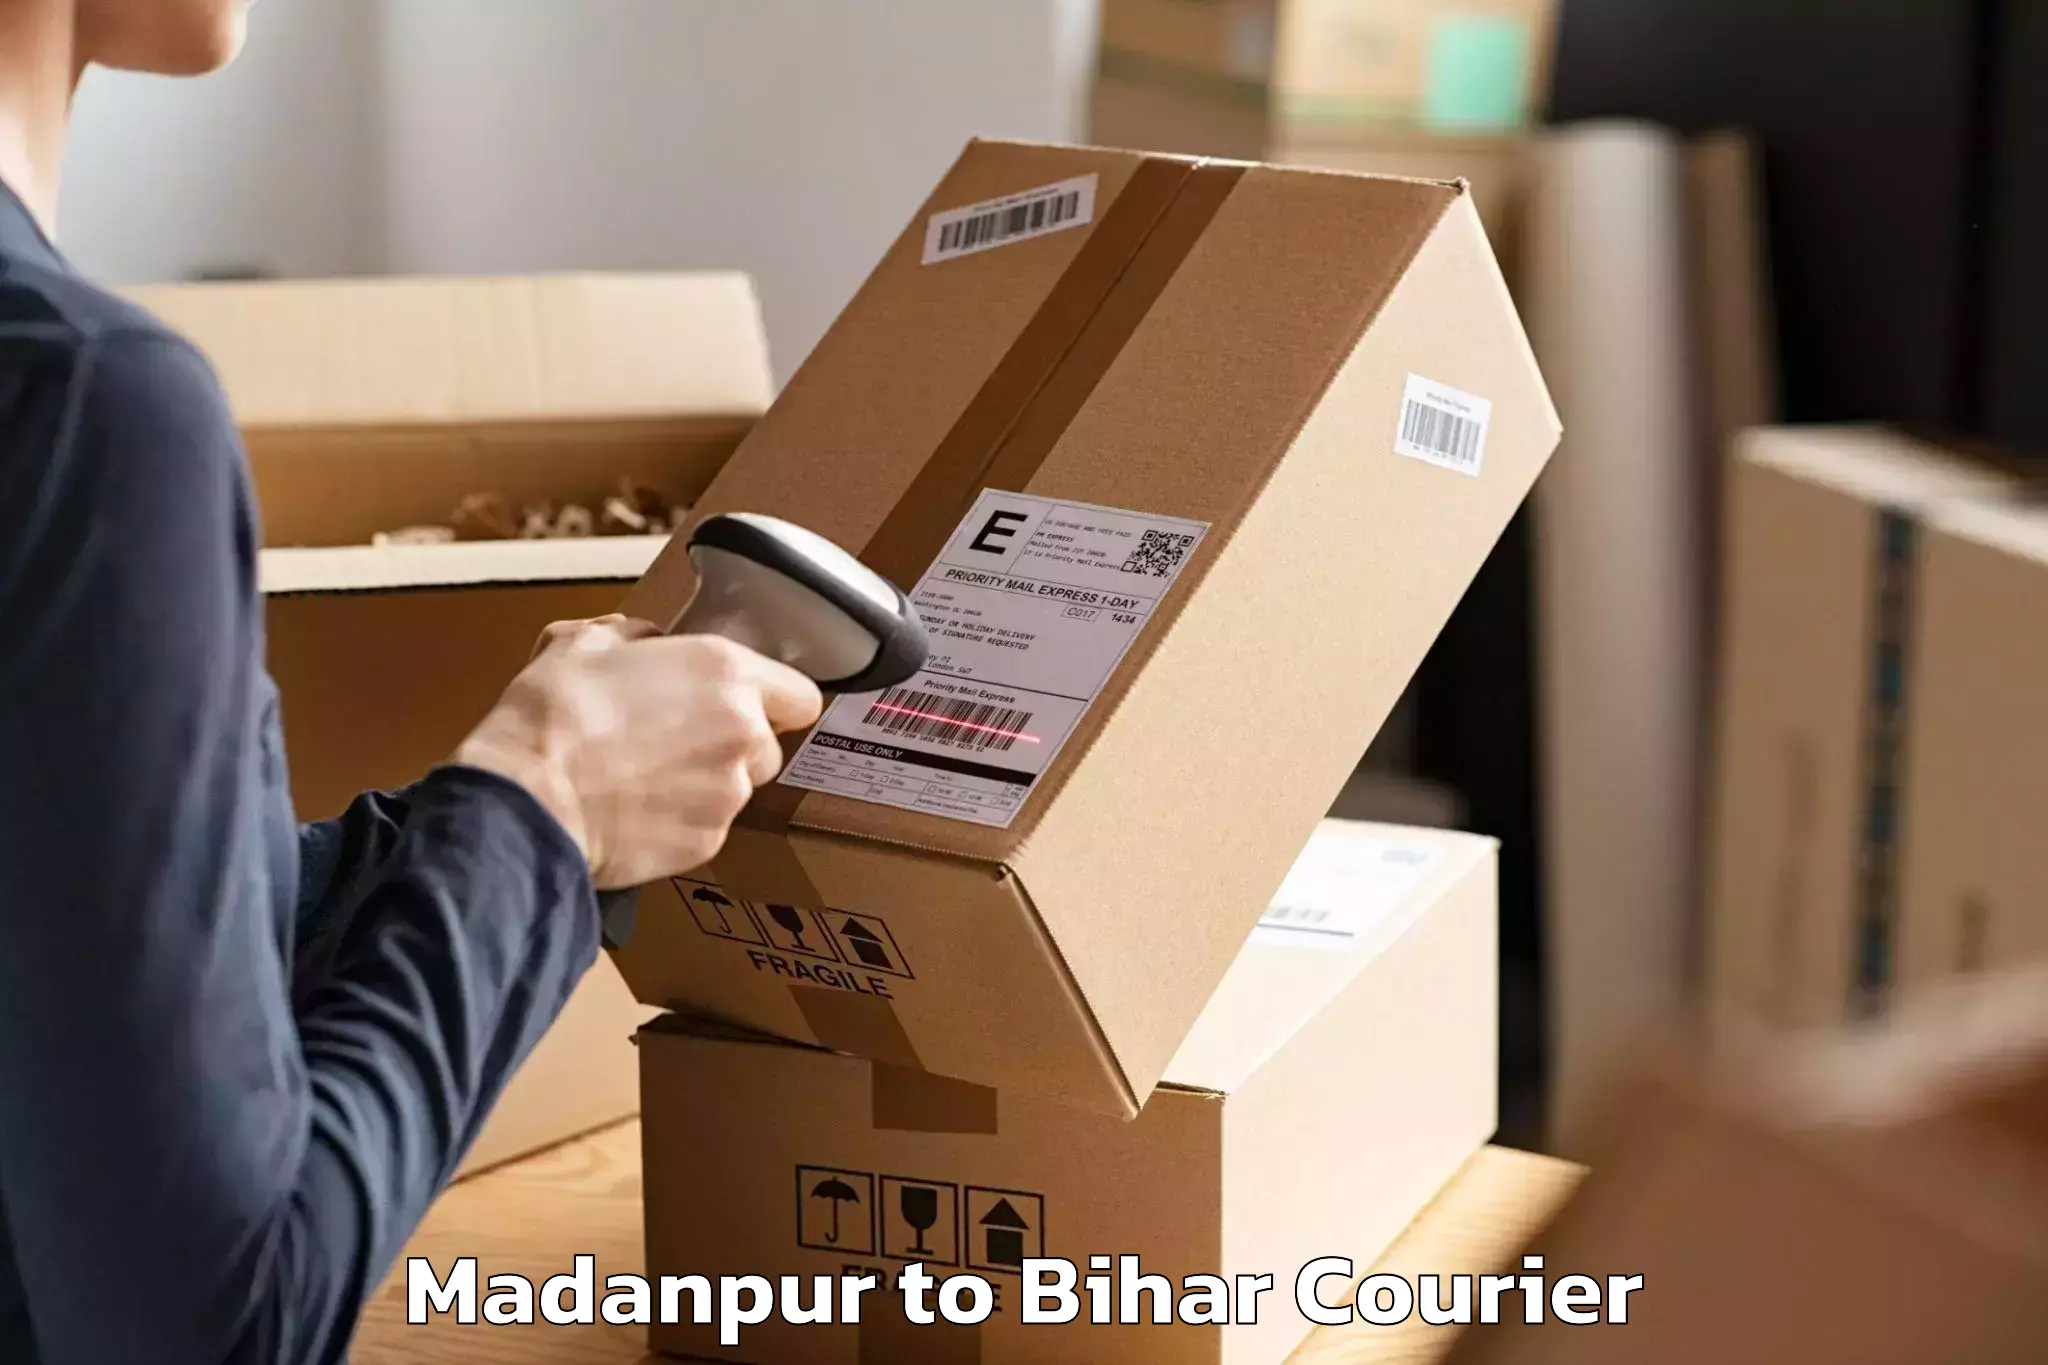 Professional moving company Madanpur to Mahnar Bazar